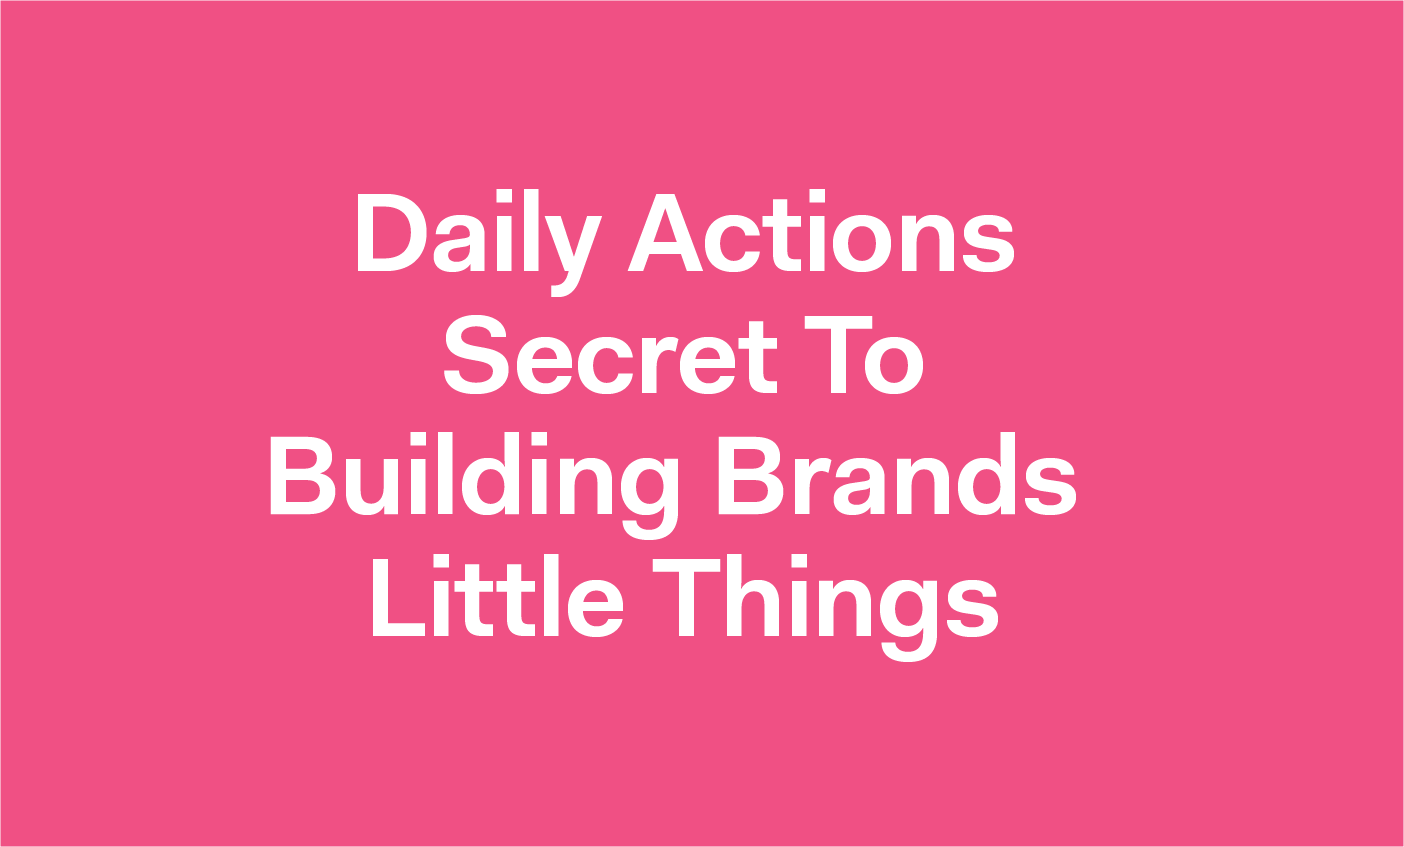 Daily actions are the secret to building b2b brands